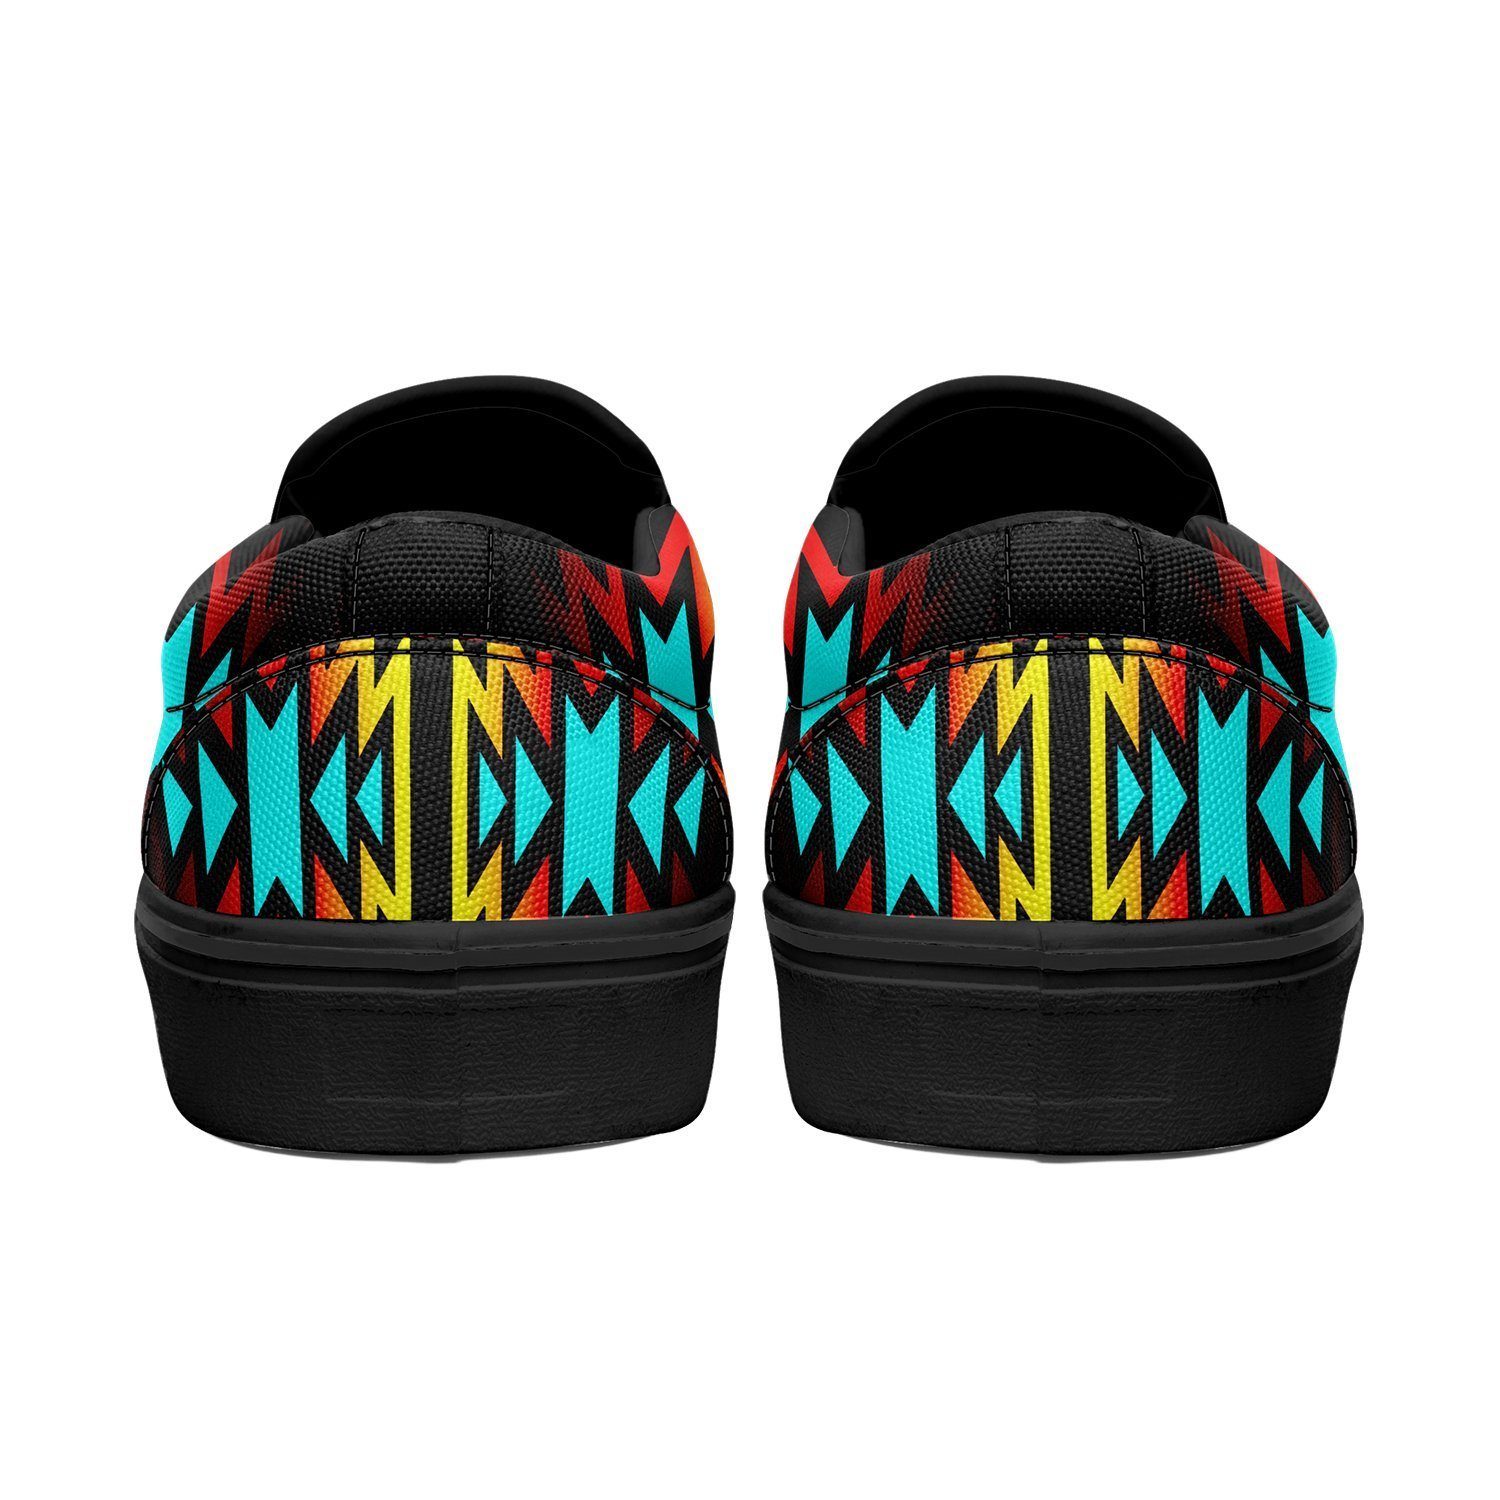 Fire Colors and Turquoise Bearpaw Otoyimm Kid's Canvas Slip On Shoes 49 Dzine 